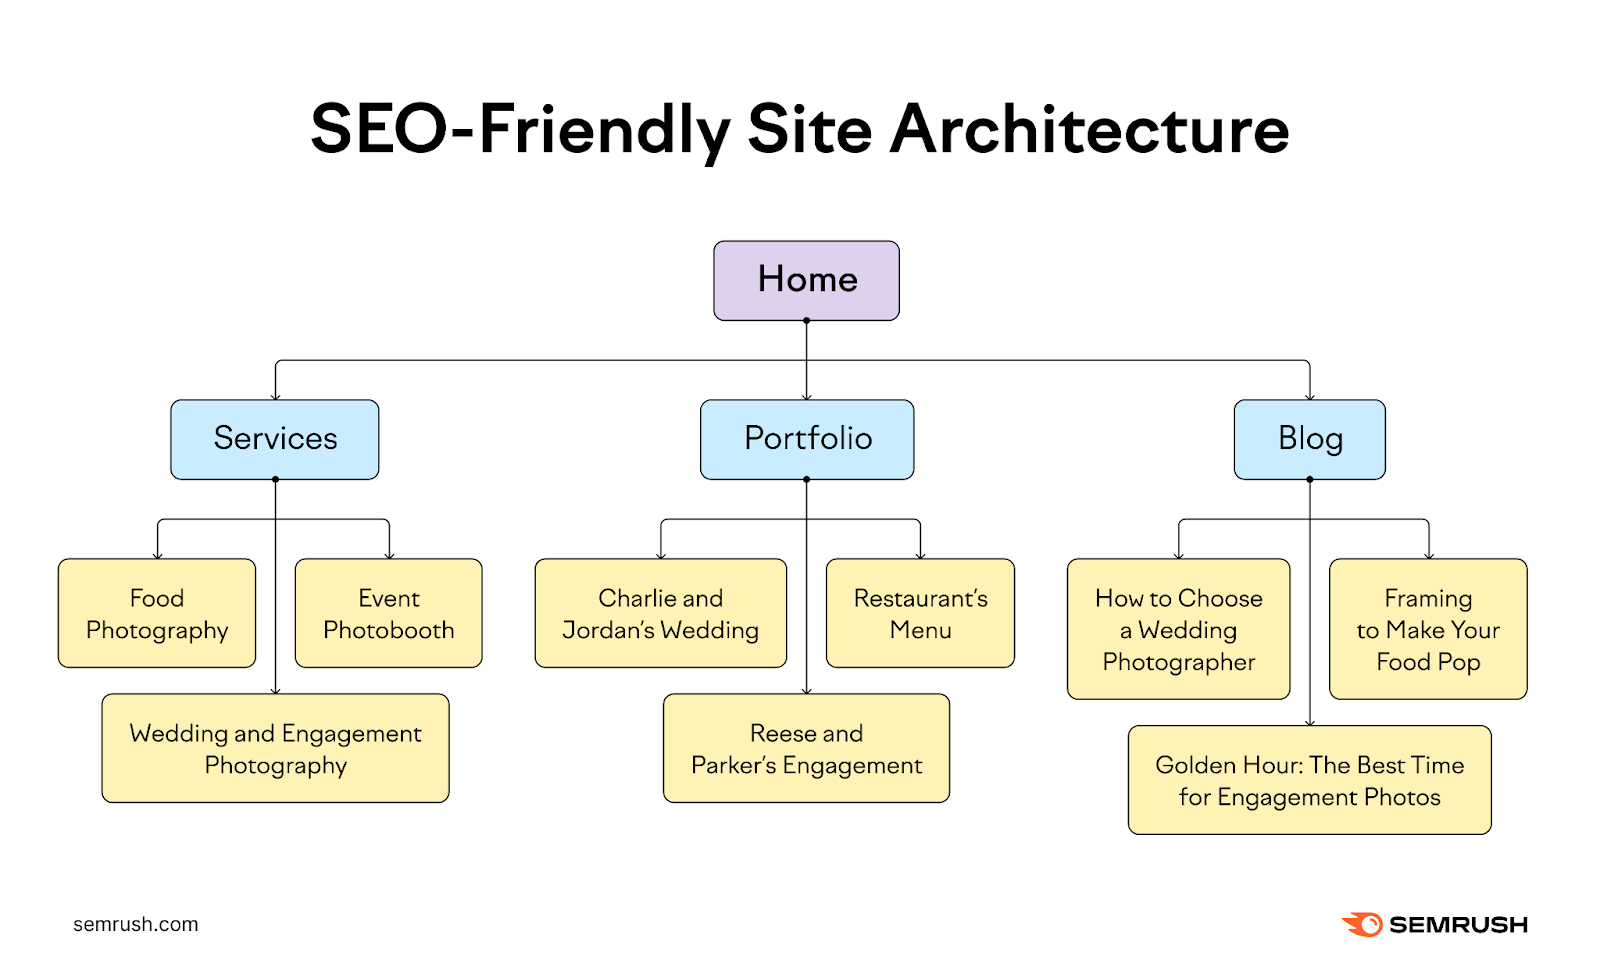 An infographic showing an example of SEO-friendly site structure